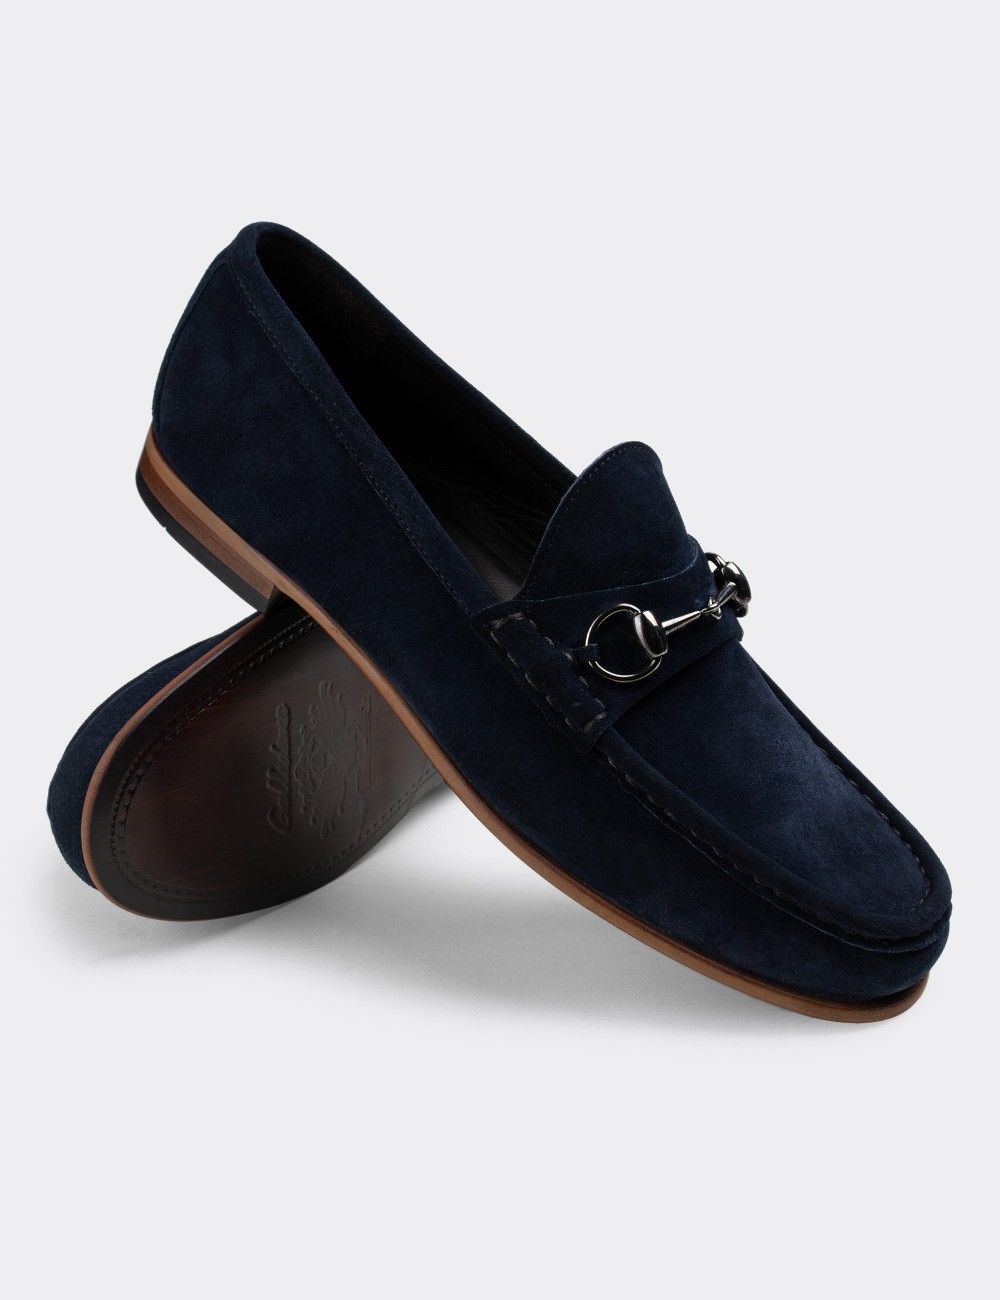 Navy Suede Leather Loafers - 01649MLCVM01